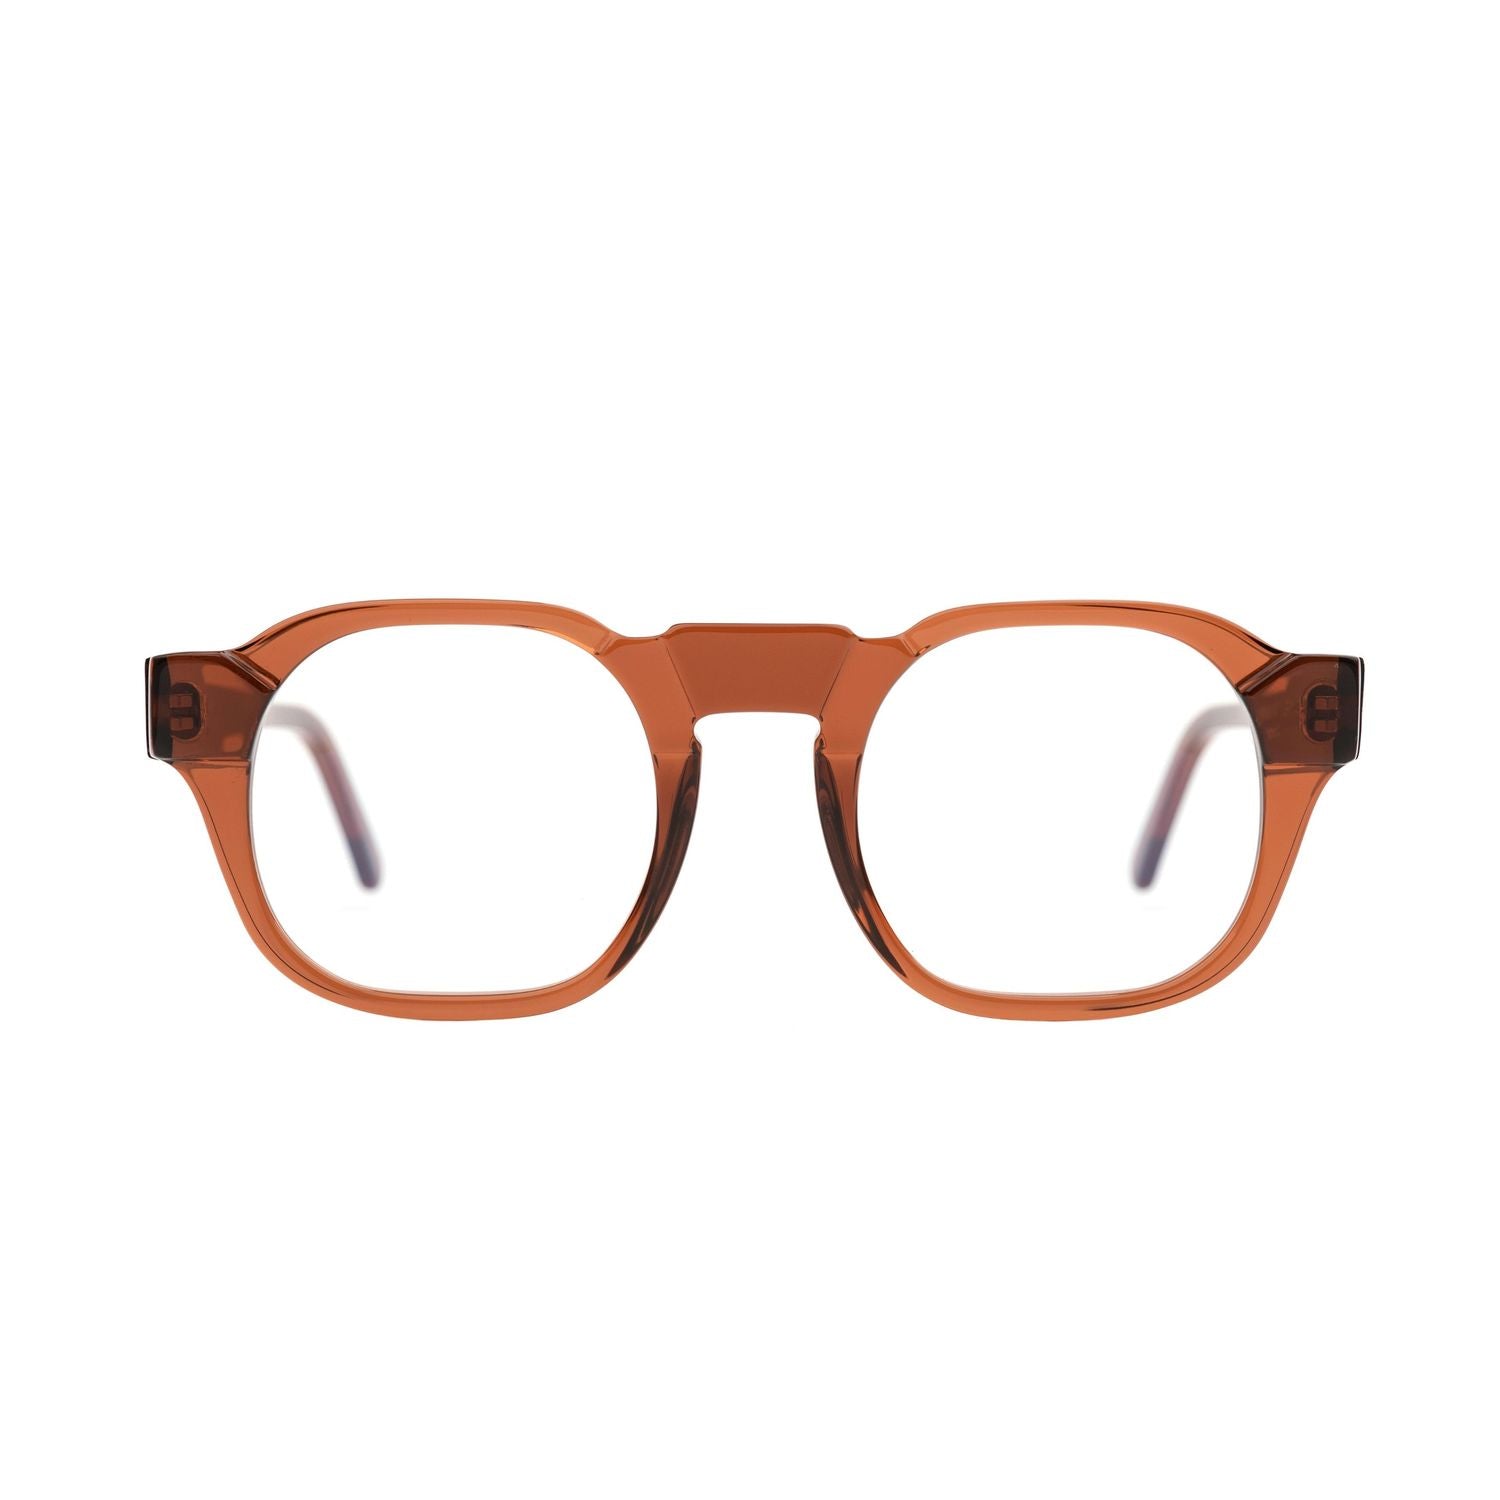 <p> Kuboraum MASKE K11 is a  Brown; Acetate Optical Frame with a Round shape.  </p><p>Shop with confidence from Adair Eyewear, a Kuboraum Authorized Dealer.  We have provided the best in customer service and great designer eyewear for over 40 years. Visit https://adaireyewearonline.com</p>